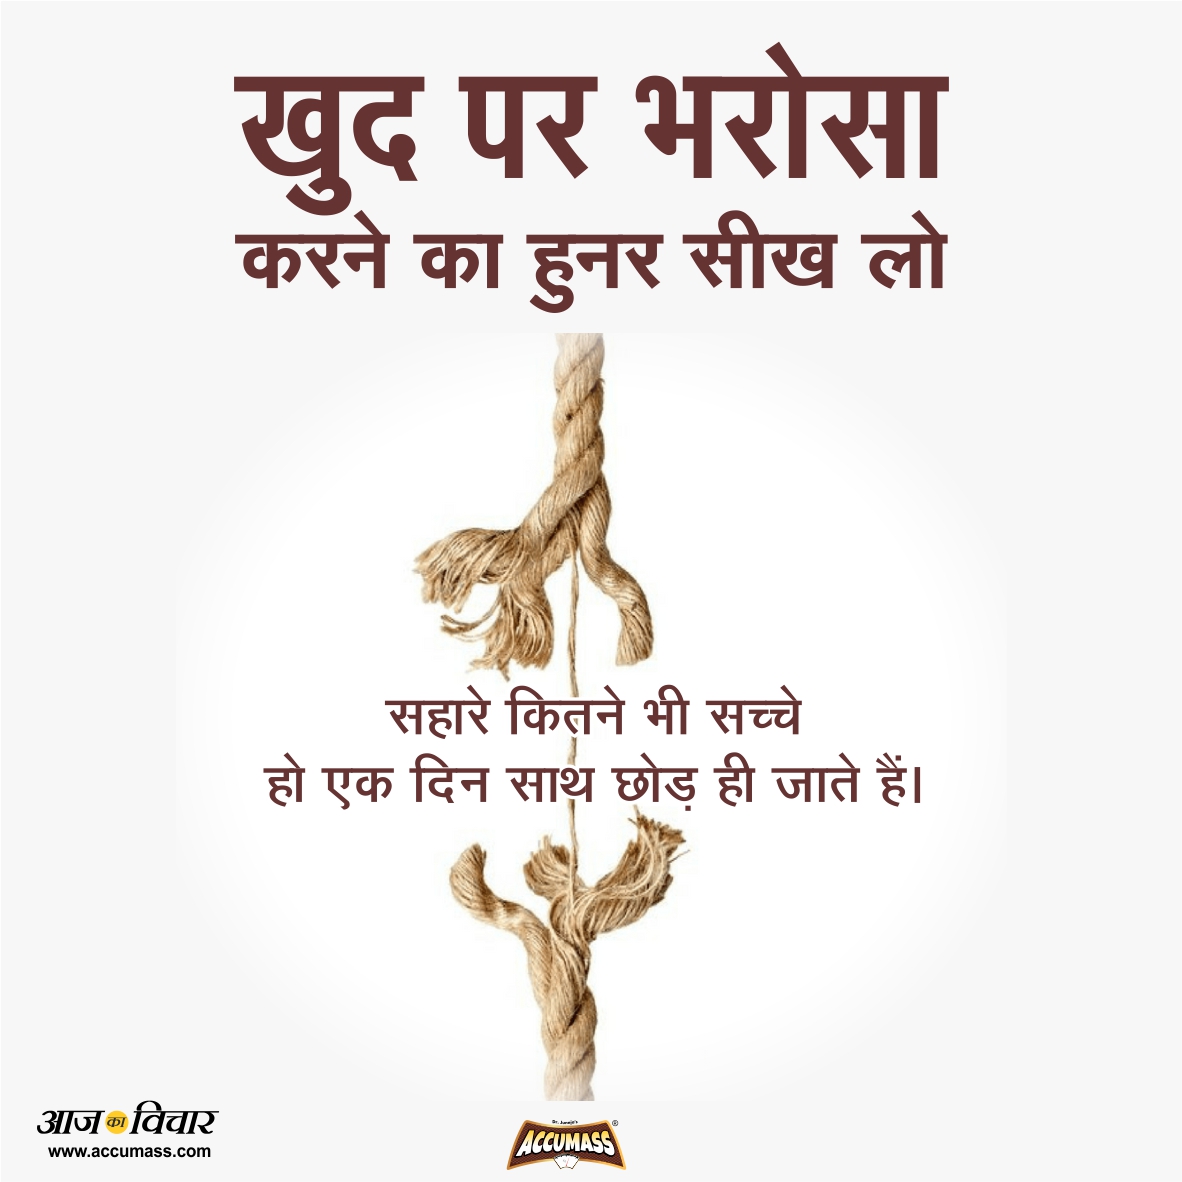 Best Hindi Quotes images of 2019 